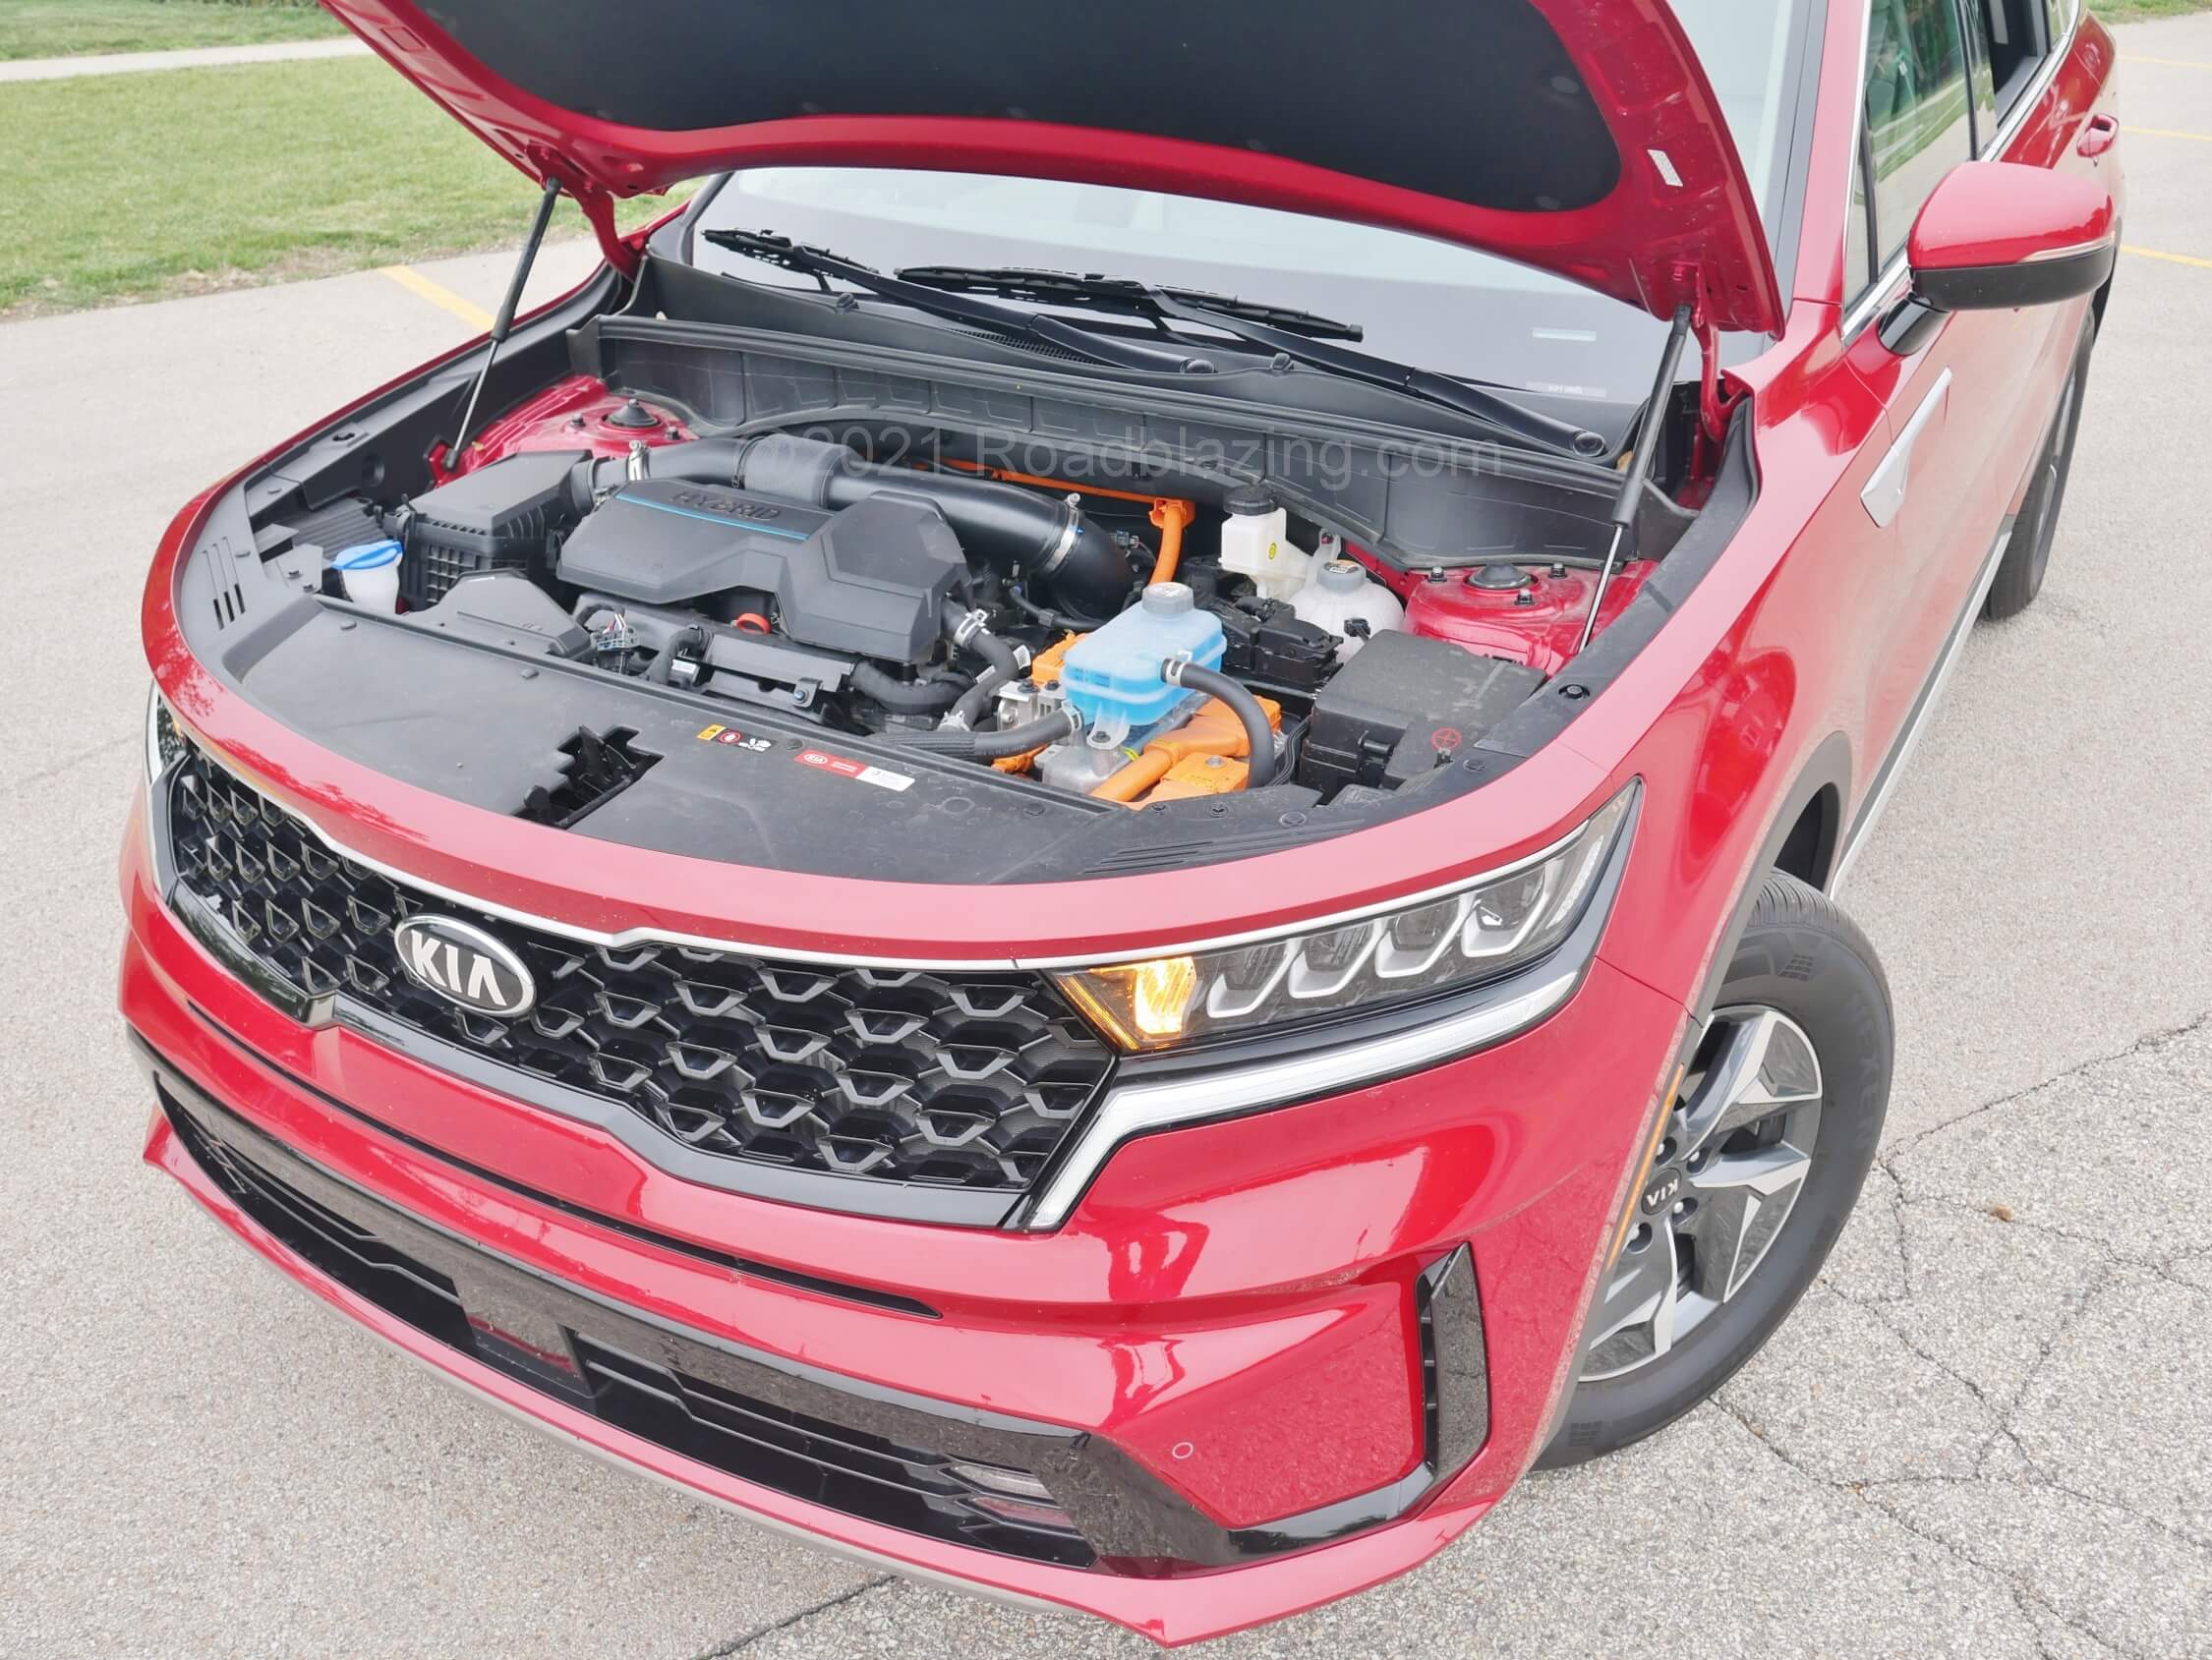 2021 Kia Sorento HEV EX 1.6T Hybrid: small displacement turbo four gas mill gets noticeable additional boost from 45 kW synchronous pole AC motor, supplied by 1.5 kWh LiIon batteries, good for 227 net hybrid horsepower